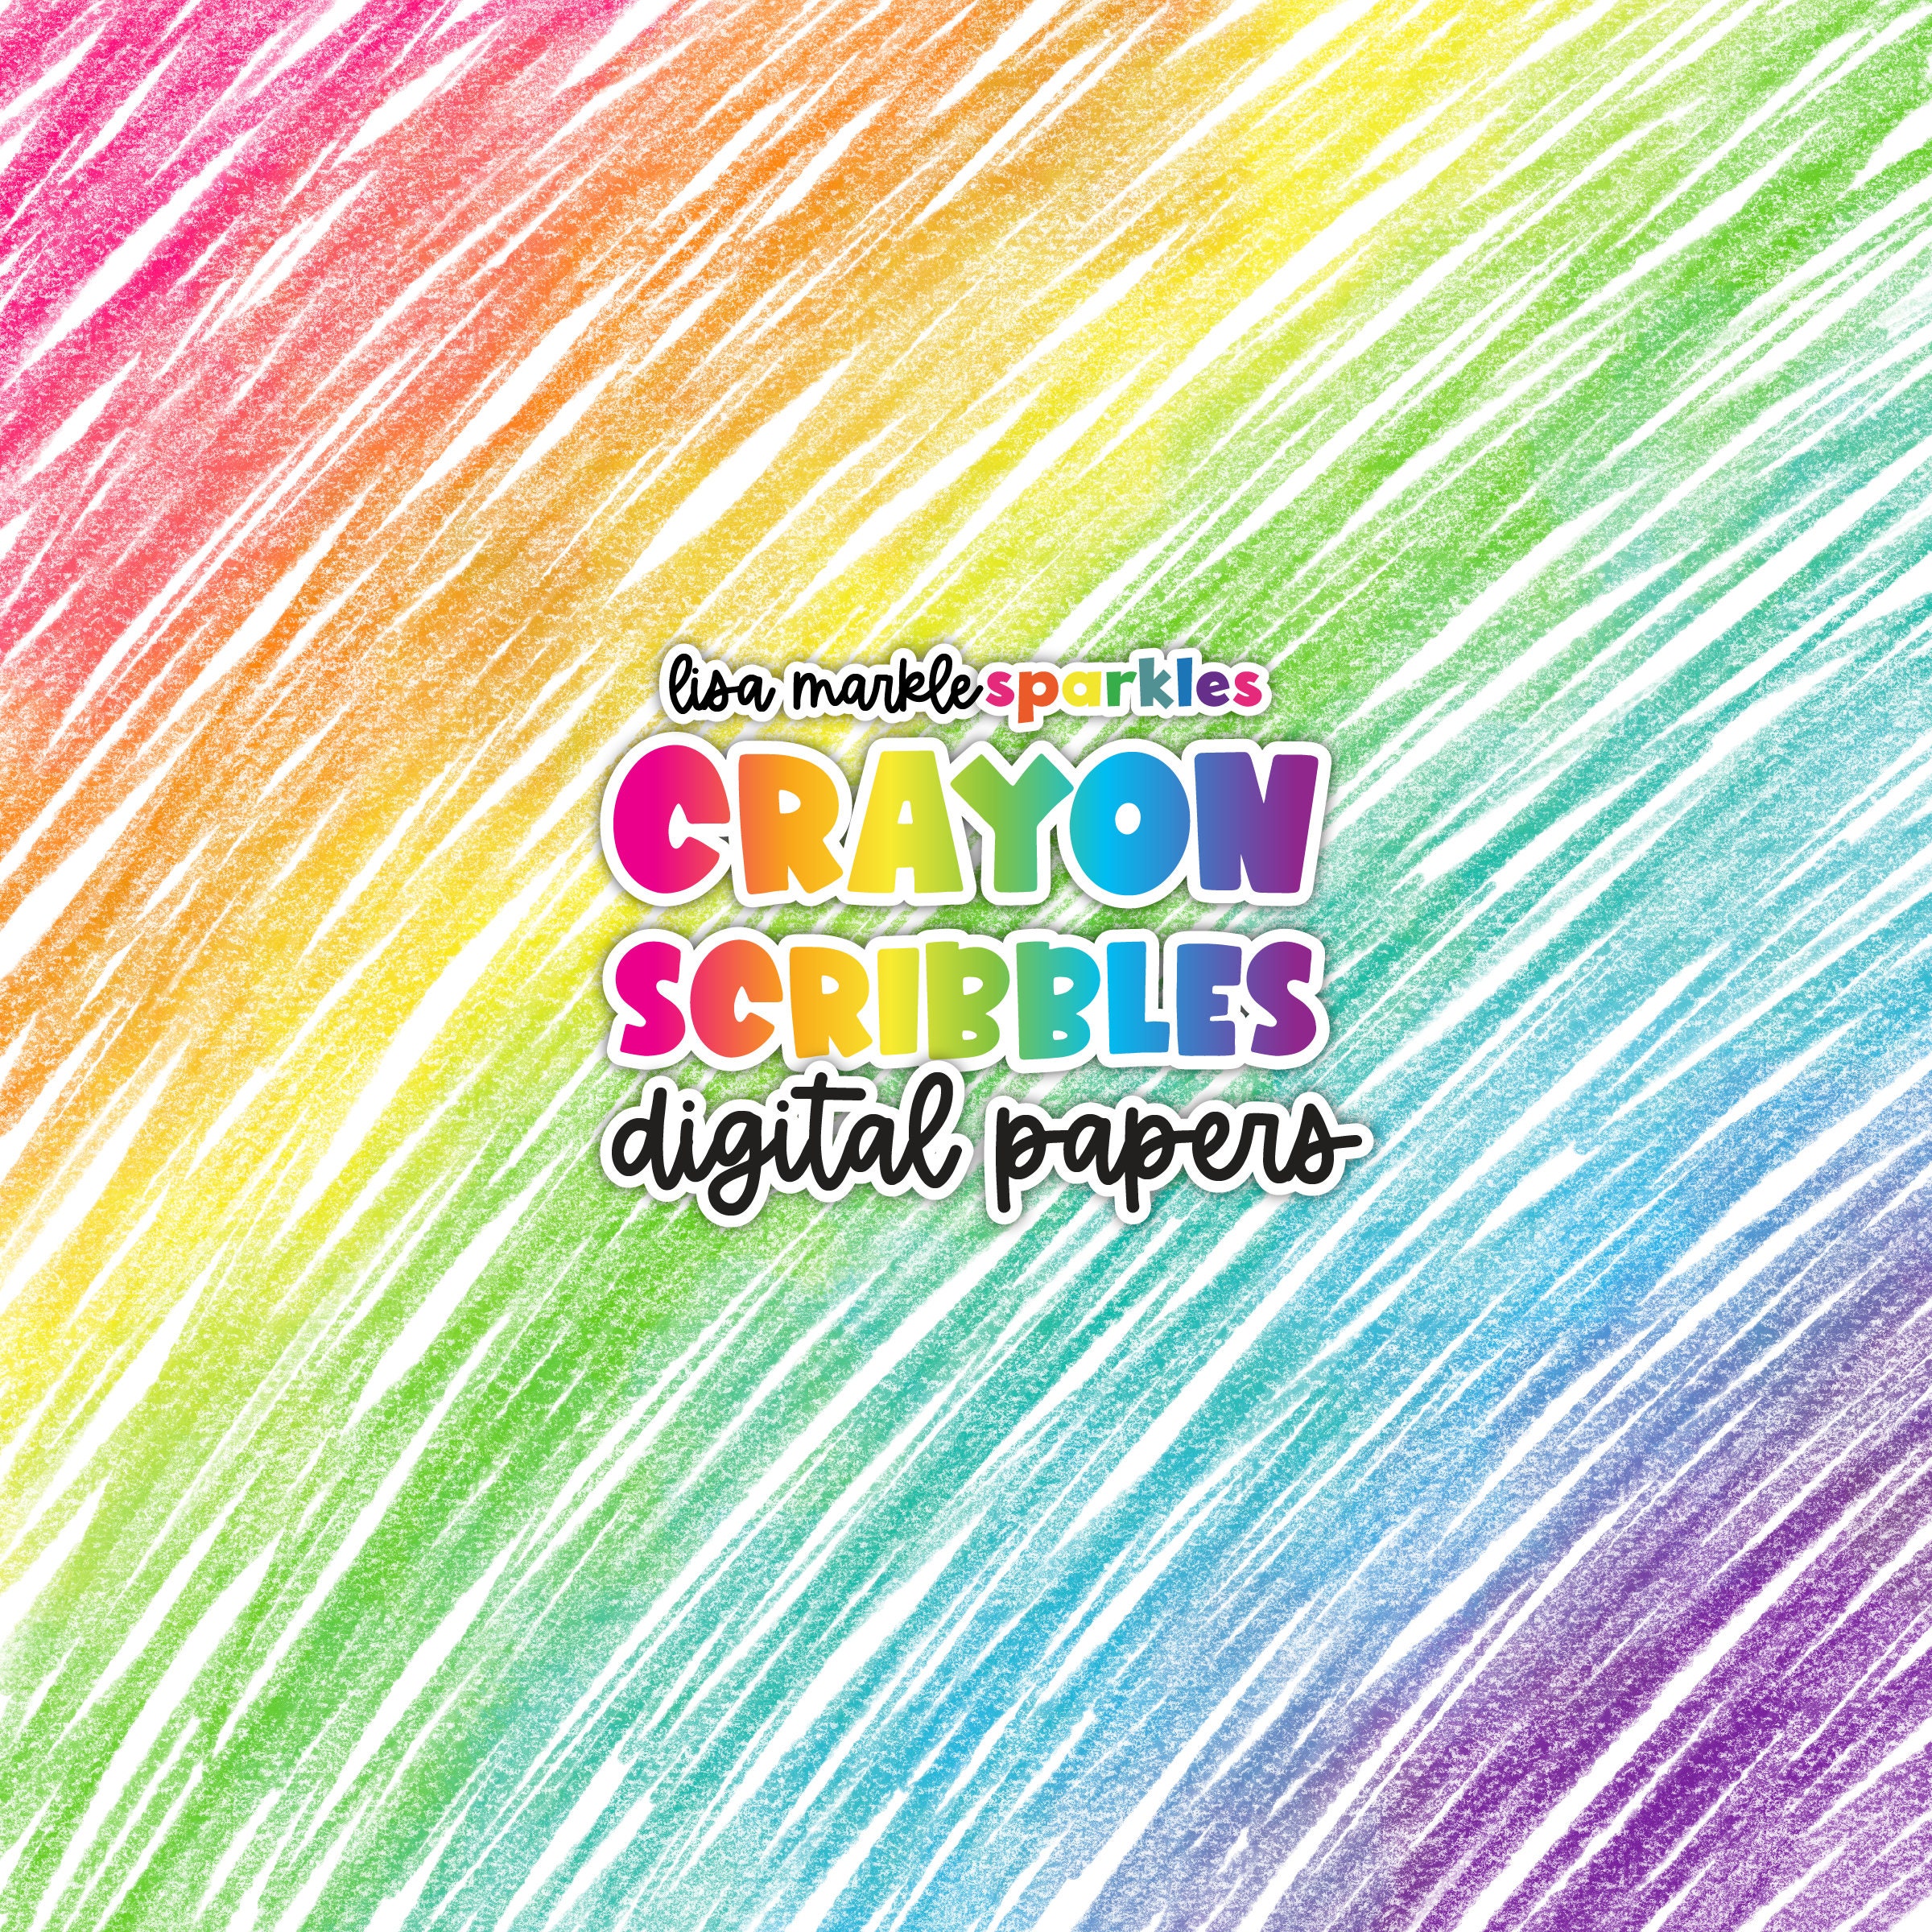 Crayons Clipart with Glitter by Lisa Markle Sparkles Clipart and